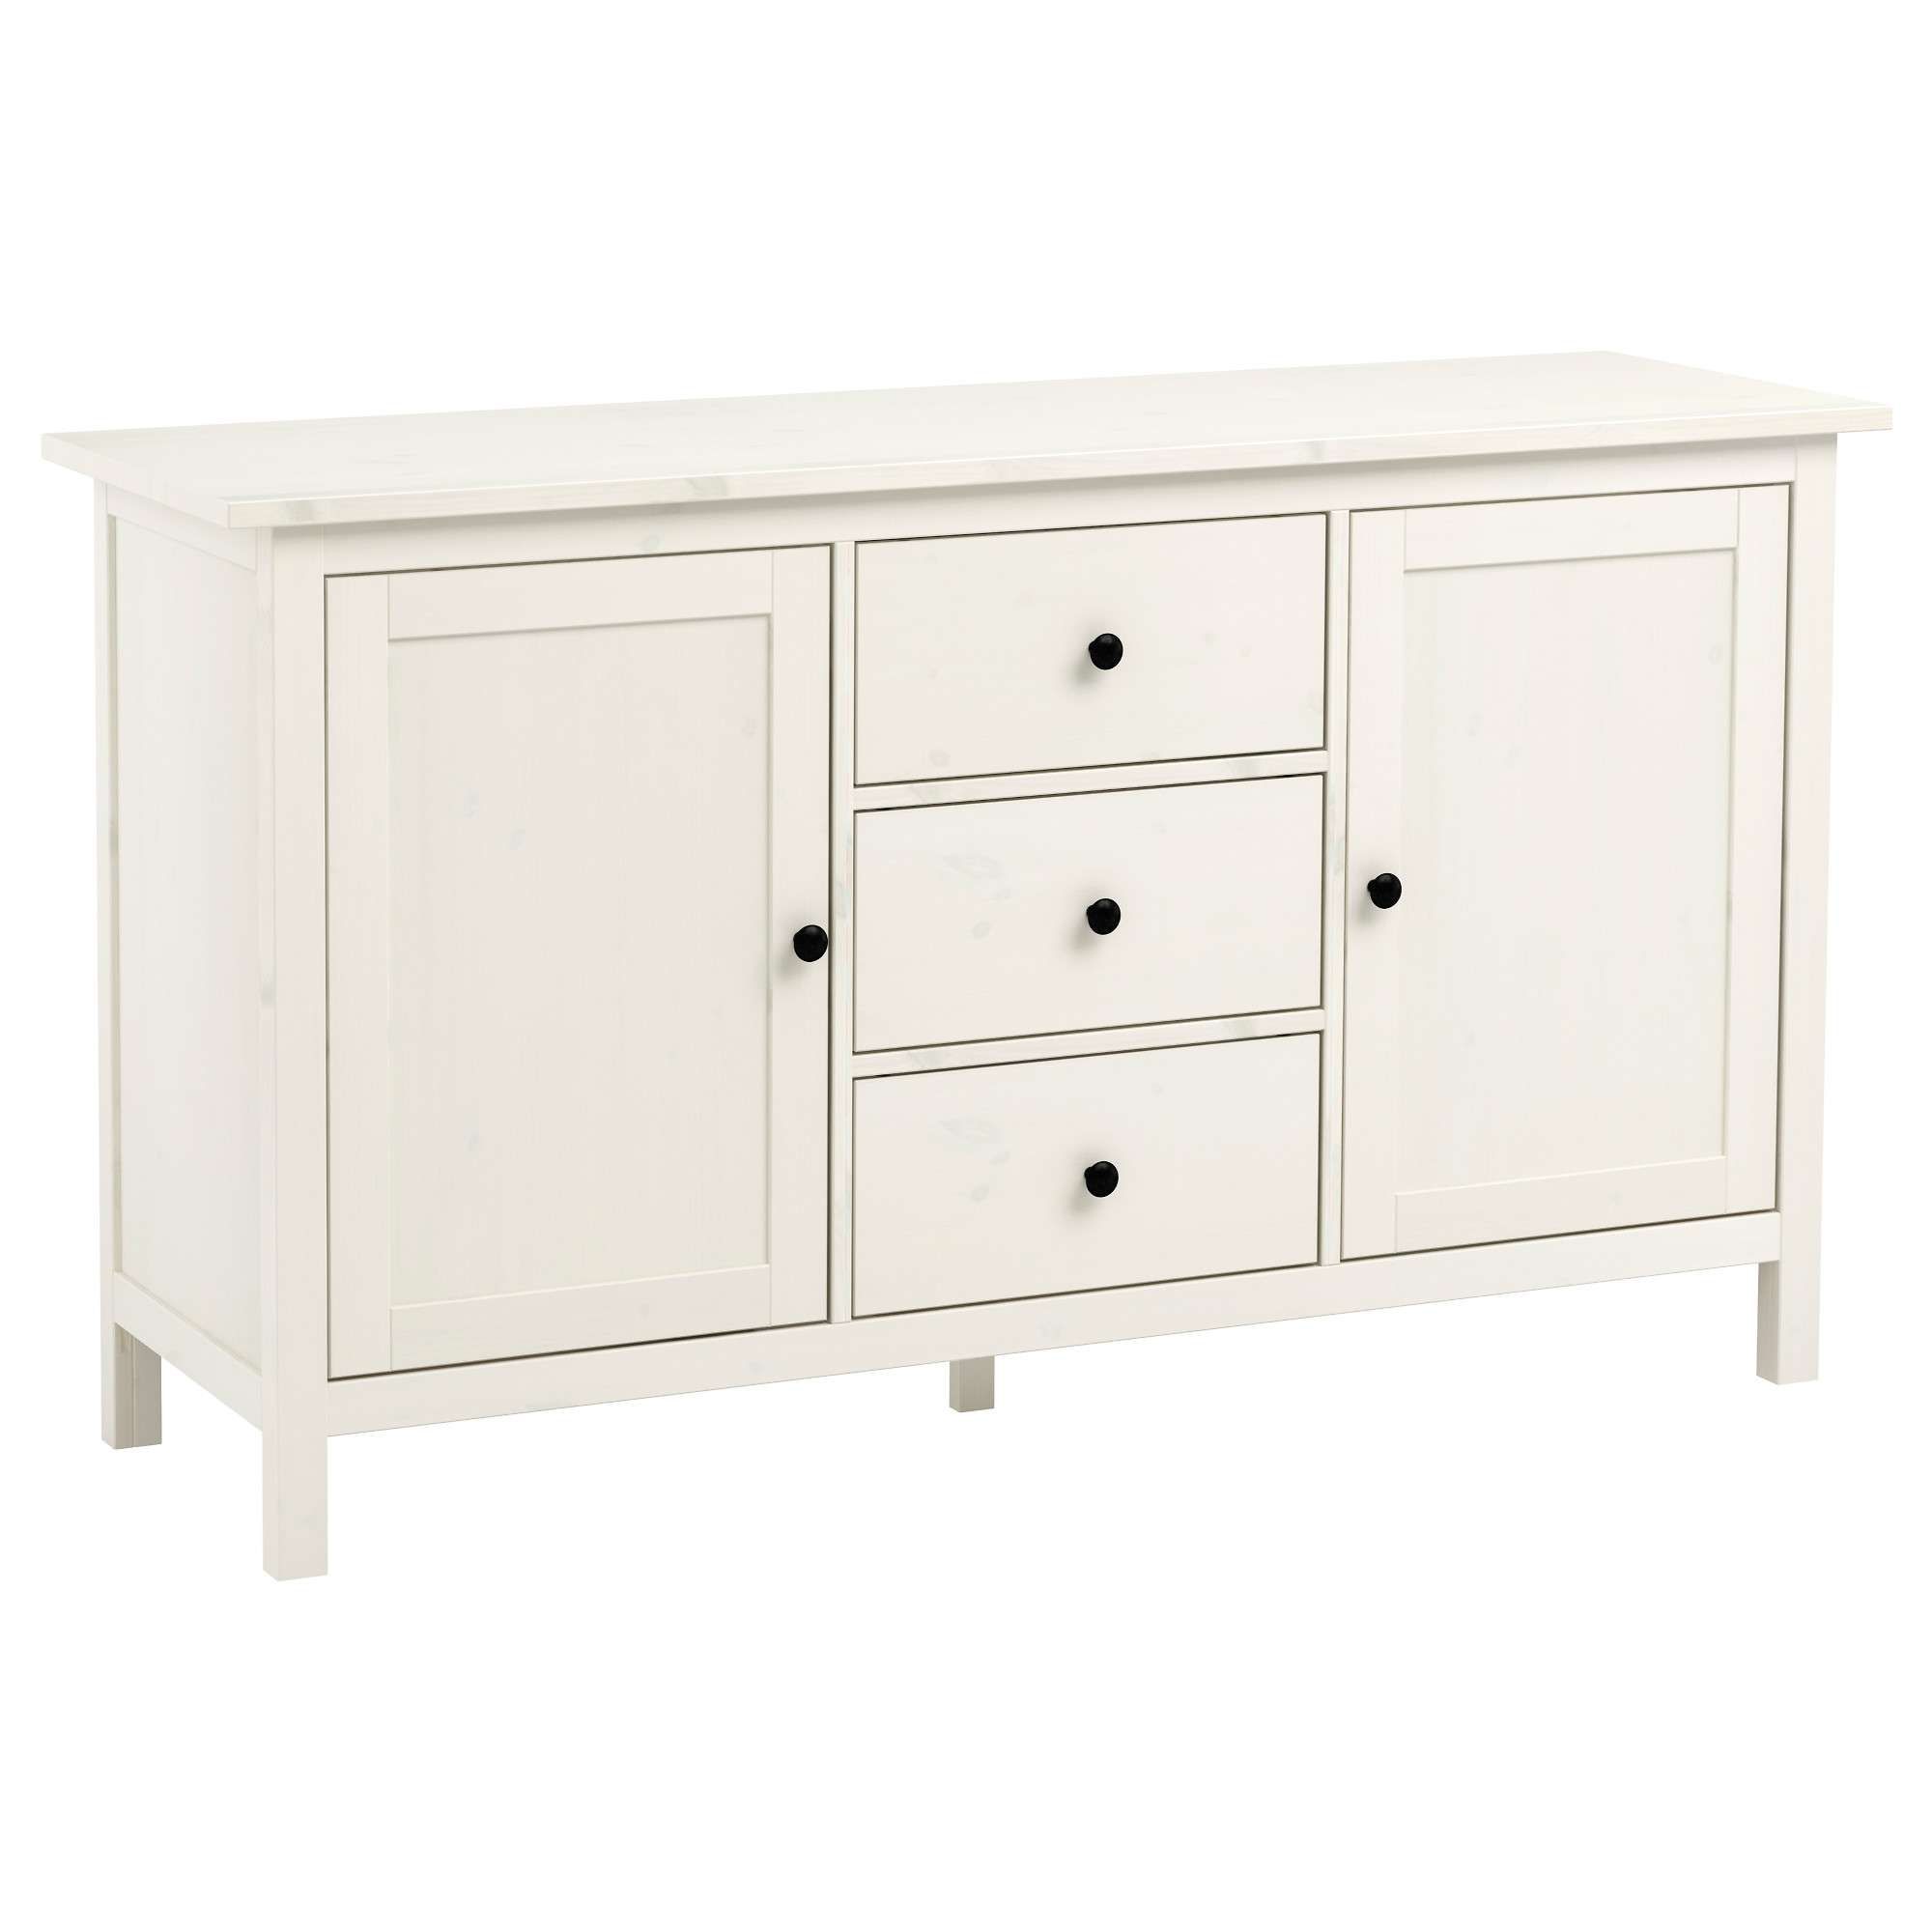 Hemnes Sideboard White Stain 157x88 Cm – Ikea Intended For White Wood Sideboards (View 9 of 20)